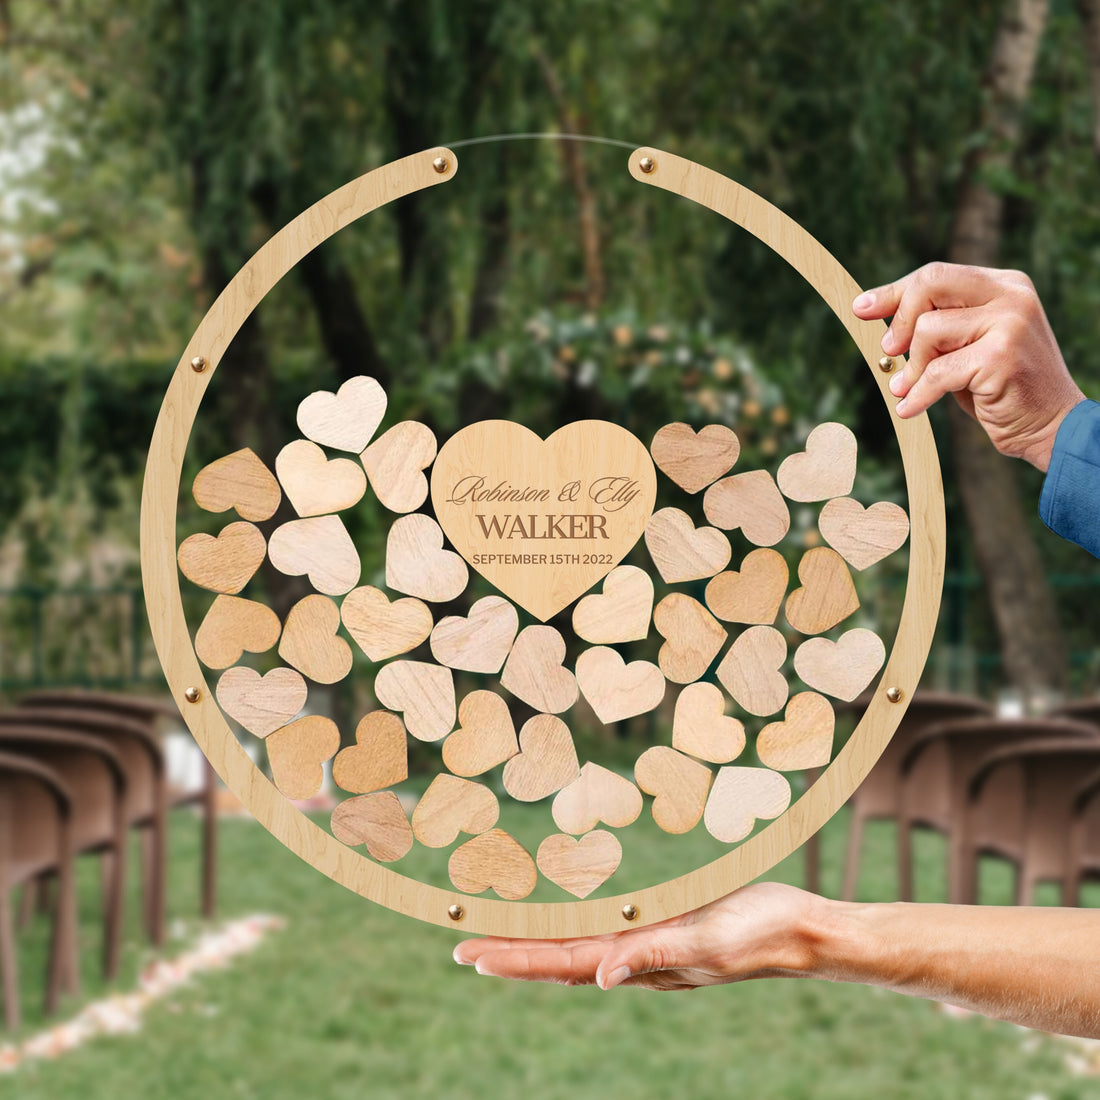 Custom Made Laser Cut Wooden & Acrylic Round Shape Wedding Heart Drop Box Rustic Personalised Circle Guest Book Alternative Stationery Decor